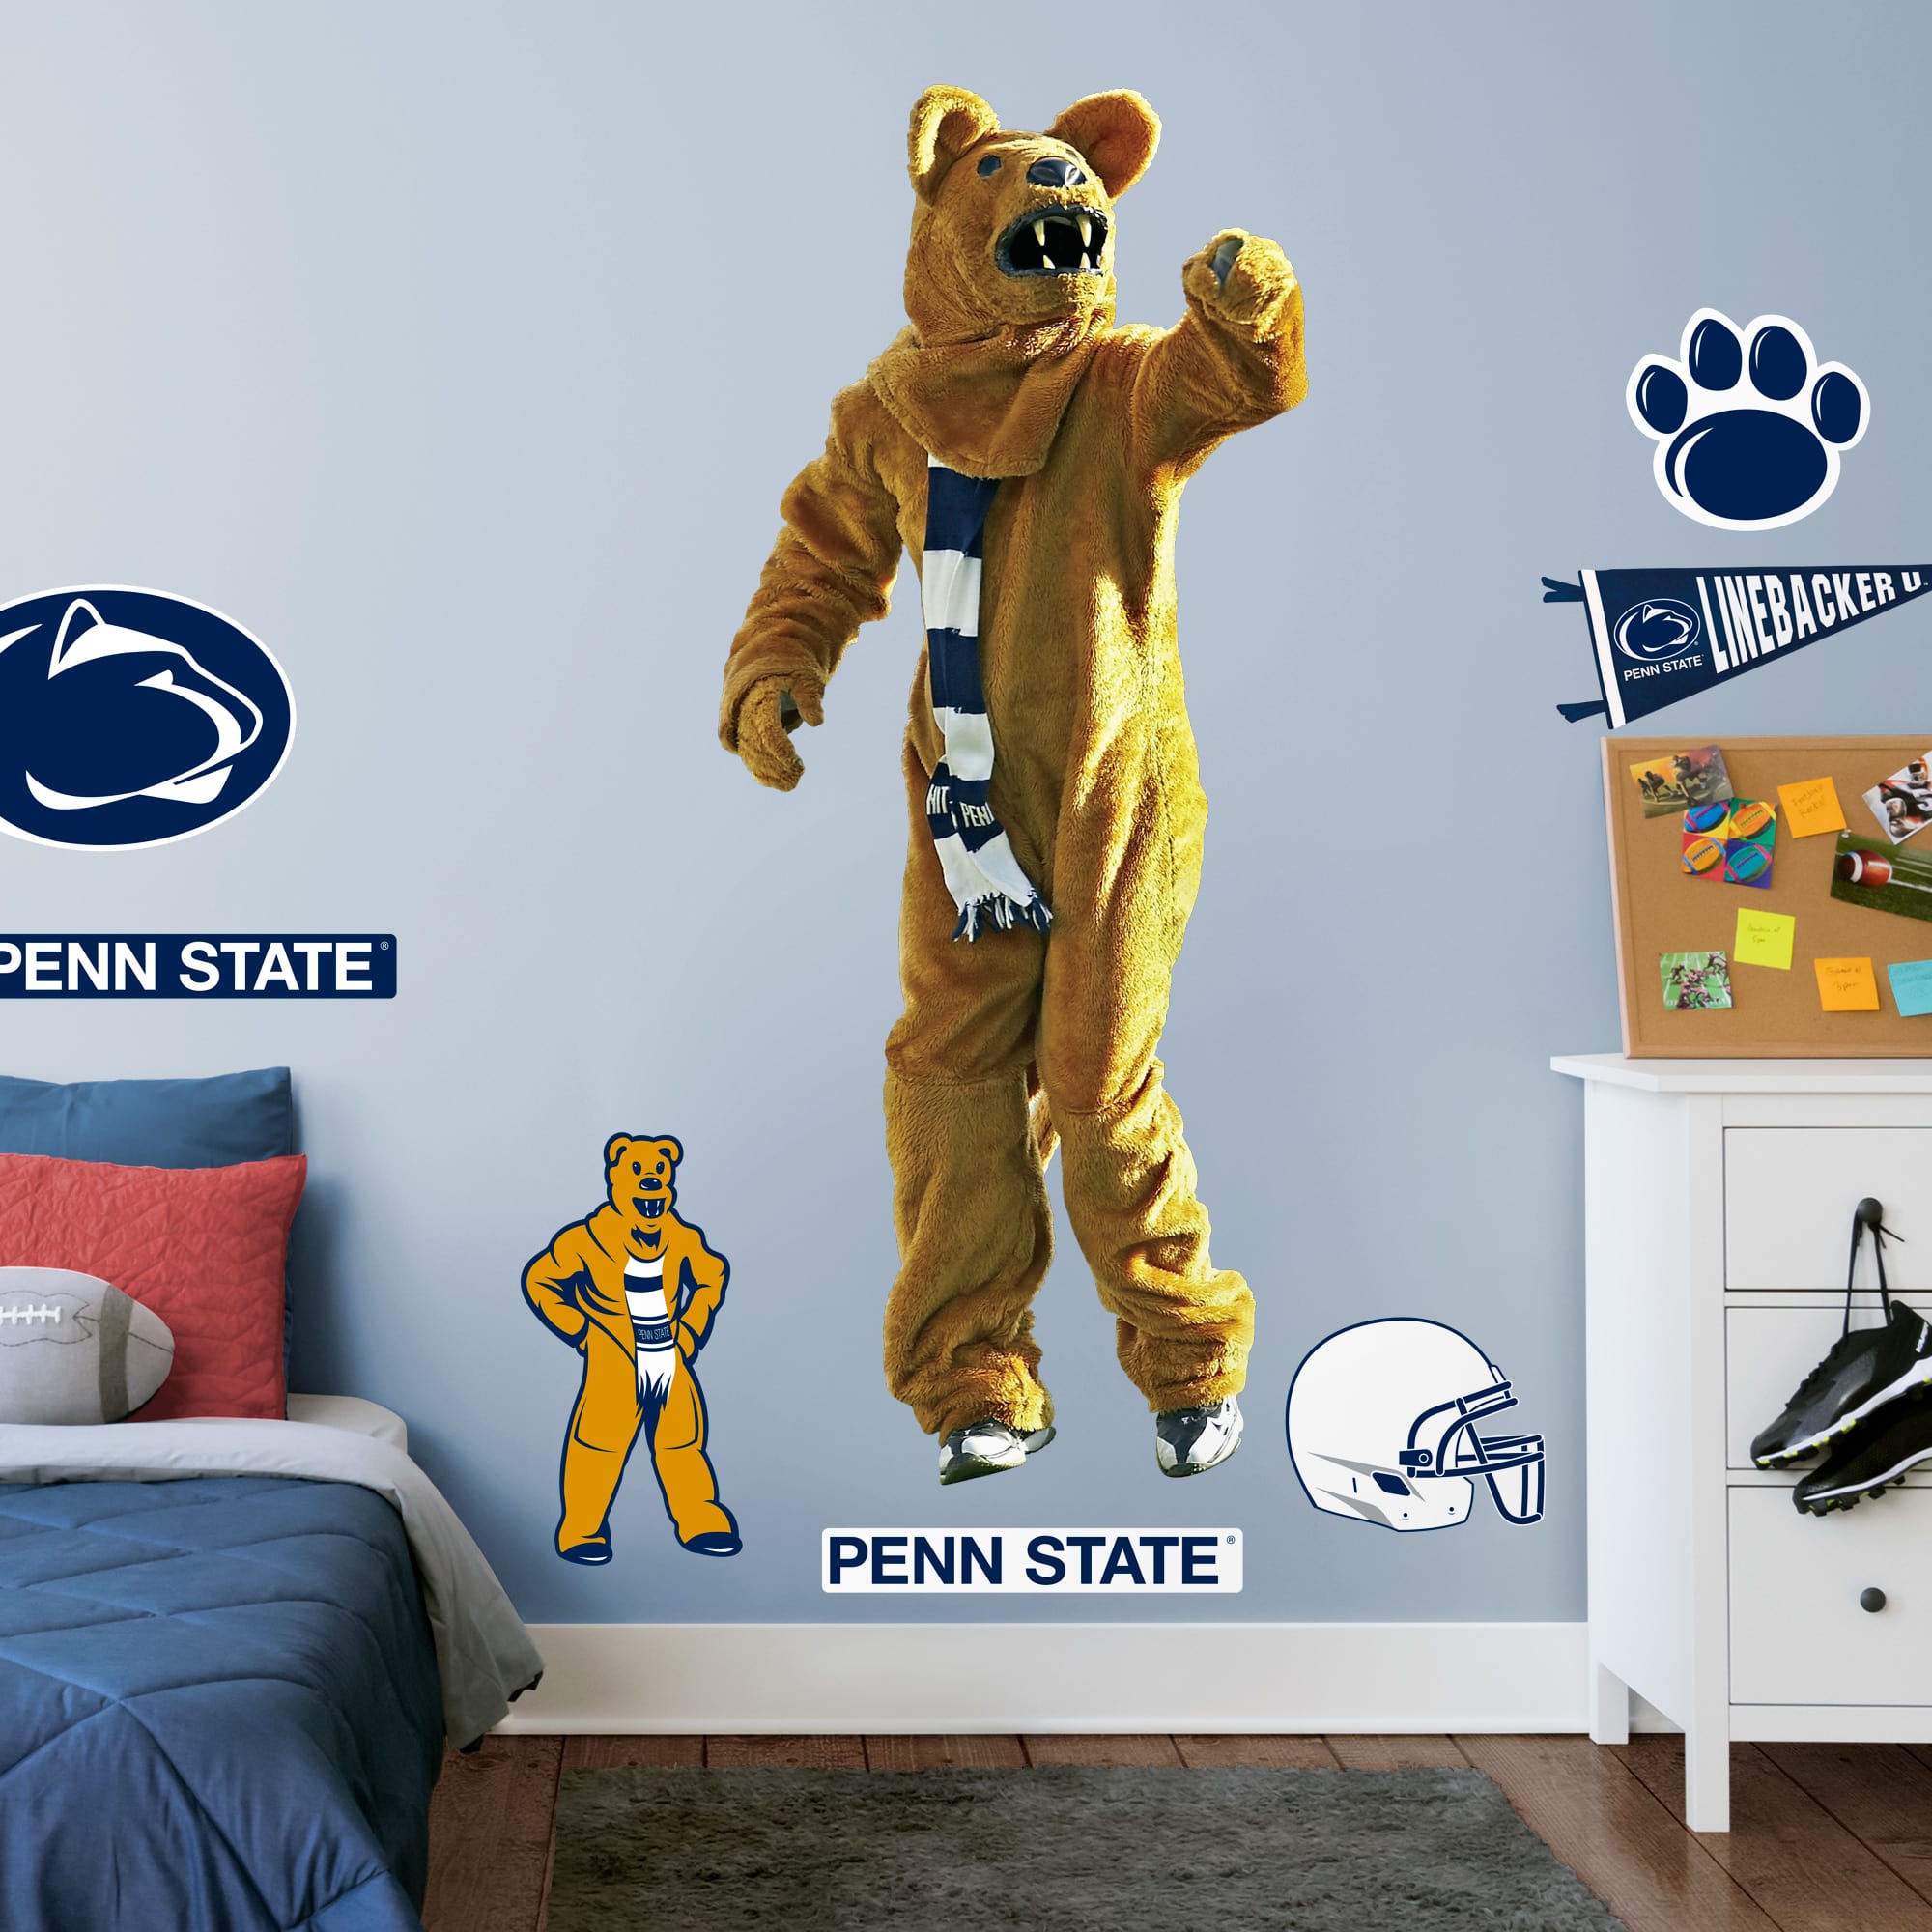 Penn State Nittany Lions: Nittany Lion Mascot - Officially Licensed Removable Wall Decal Life-Size Mascot + 10 Decals (32"W x 77